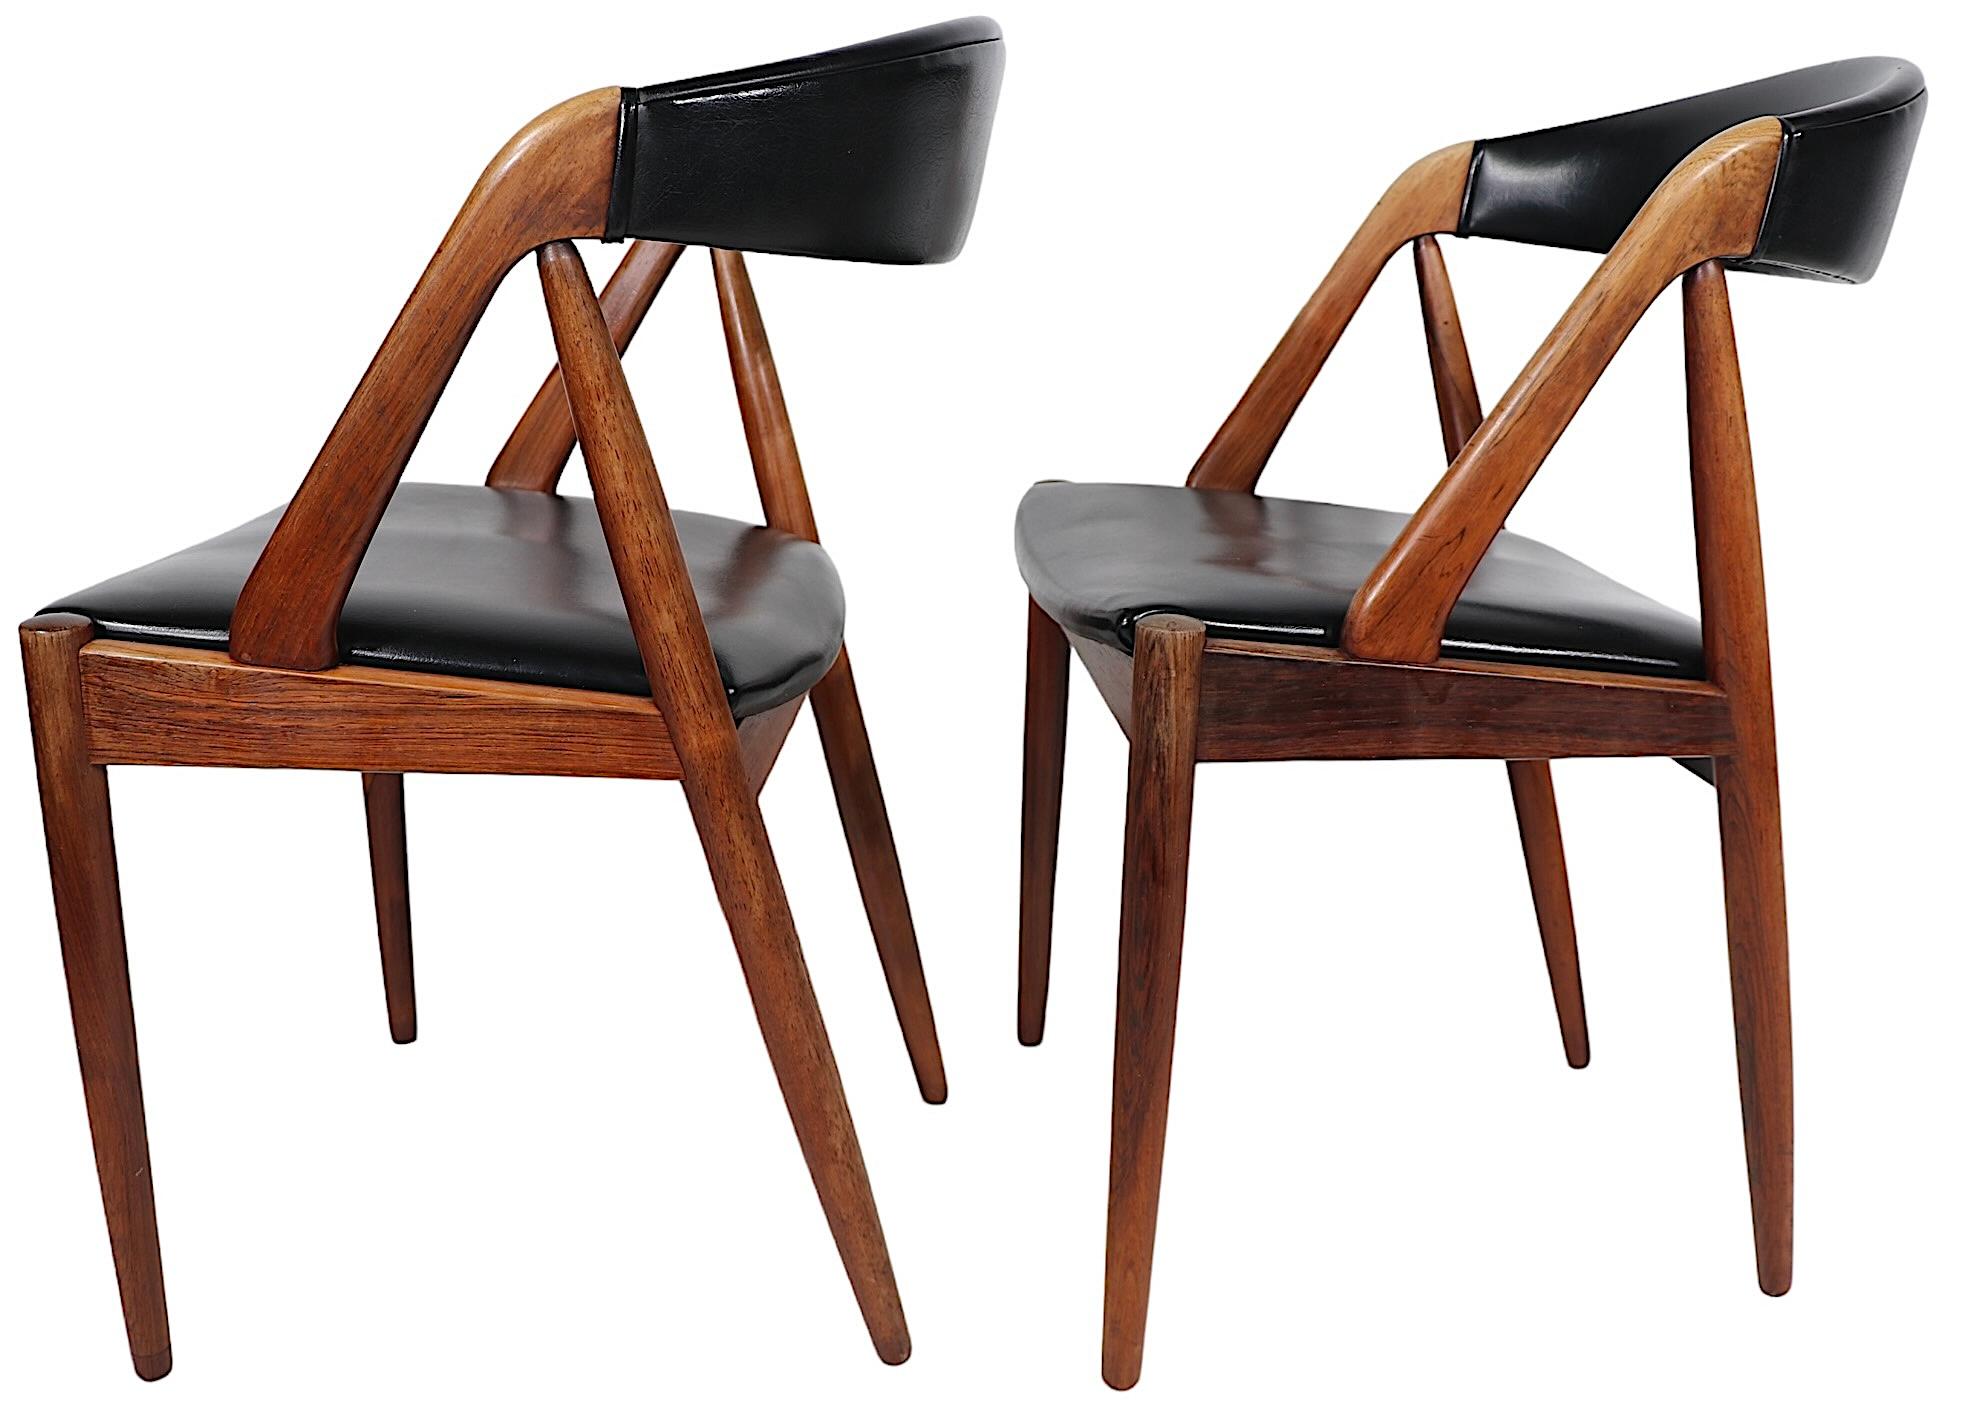  4 Rosewood Model 31 Danish Mid Century Modern Dining Chairs by Kai Kristiansen  In Good Condition For Sale In New York, NY